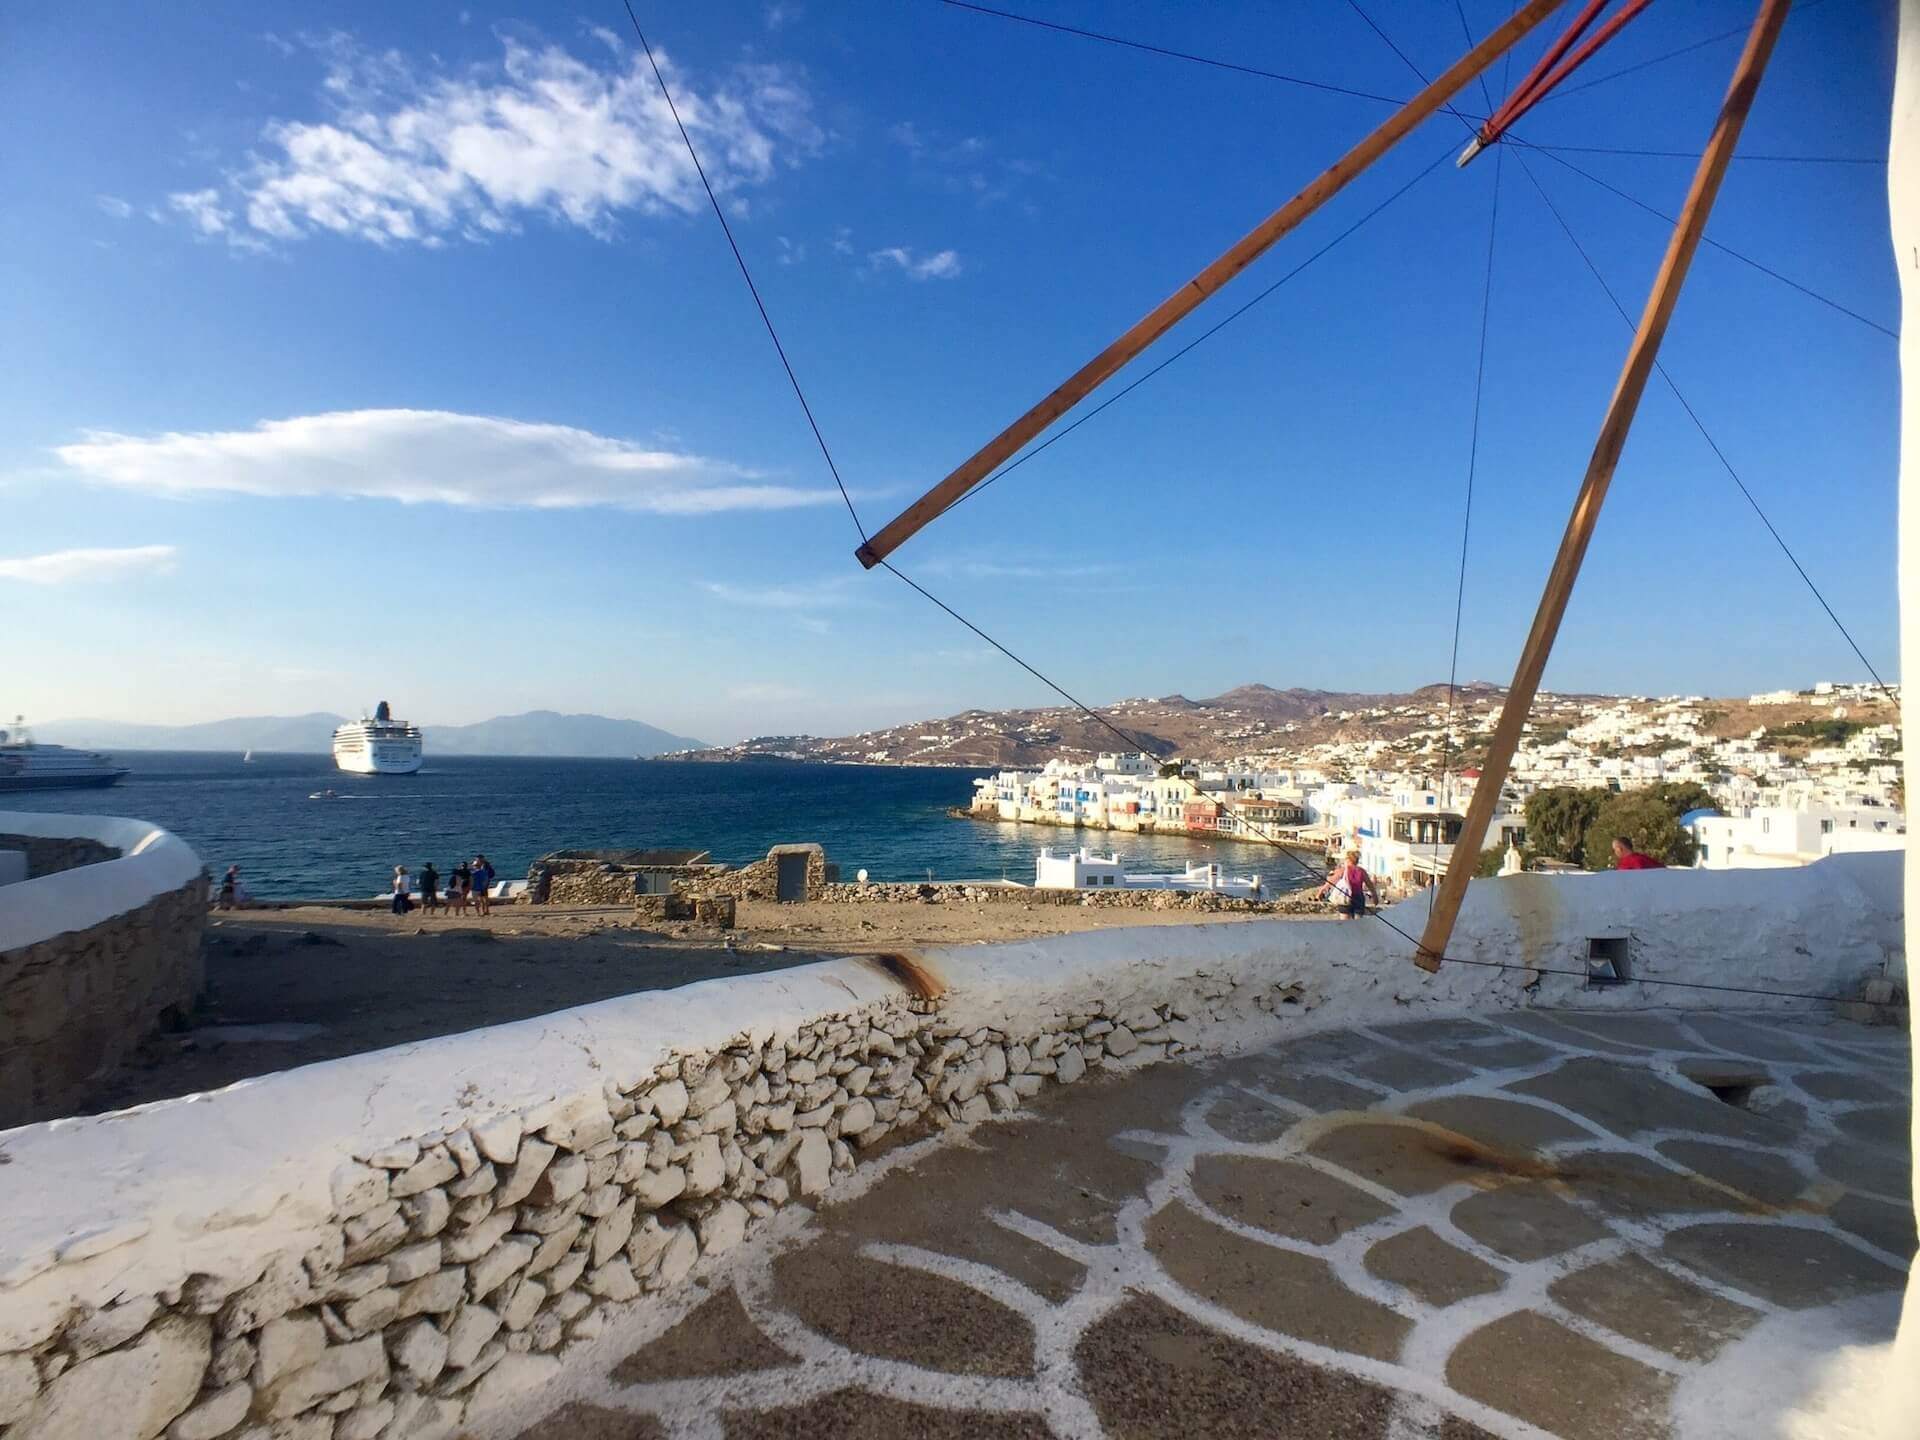 View of the sea from next to the windmill in Mykonos town